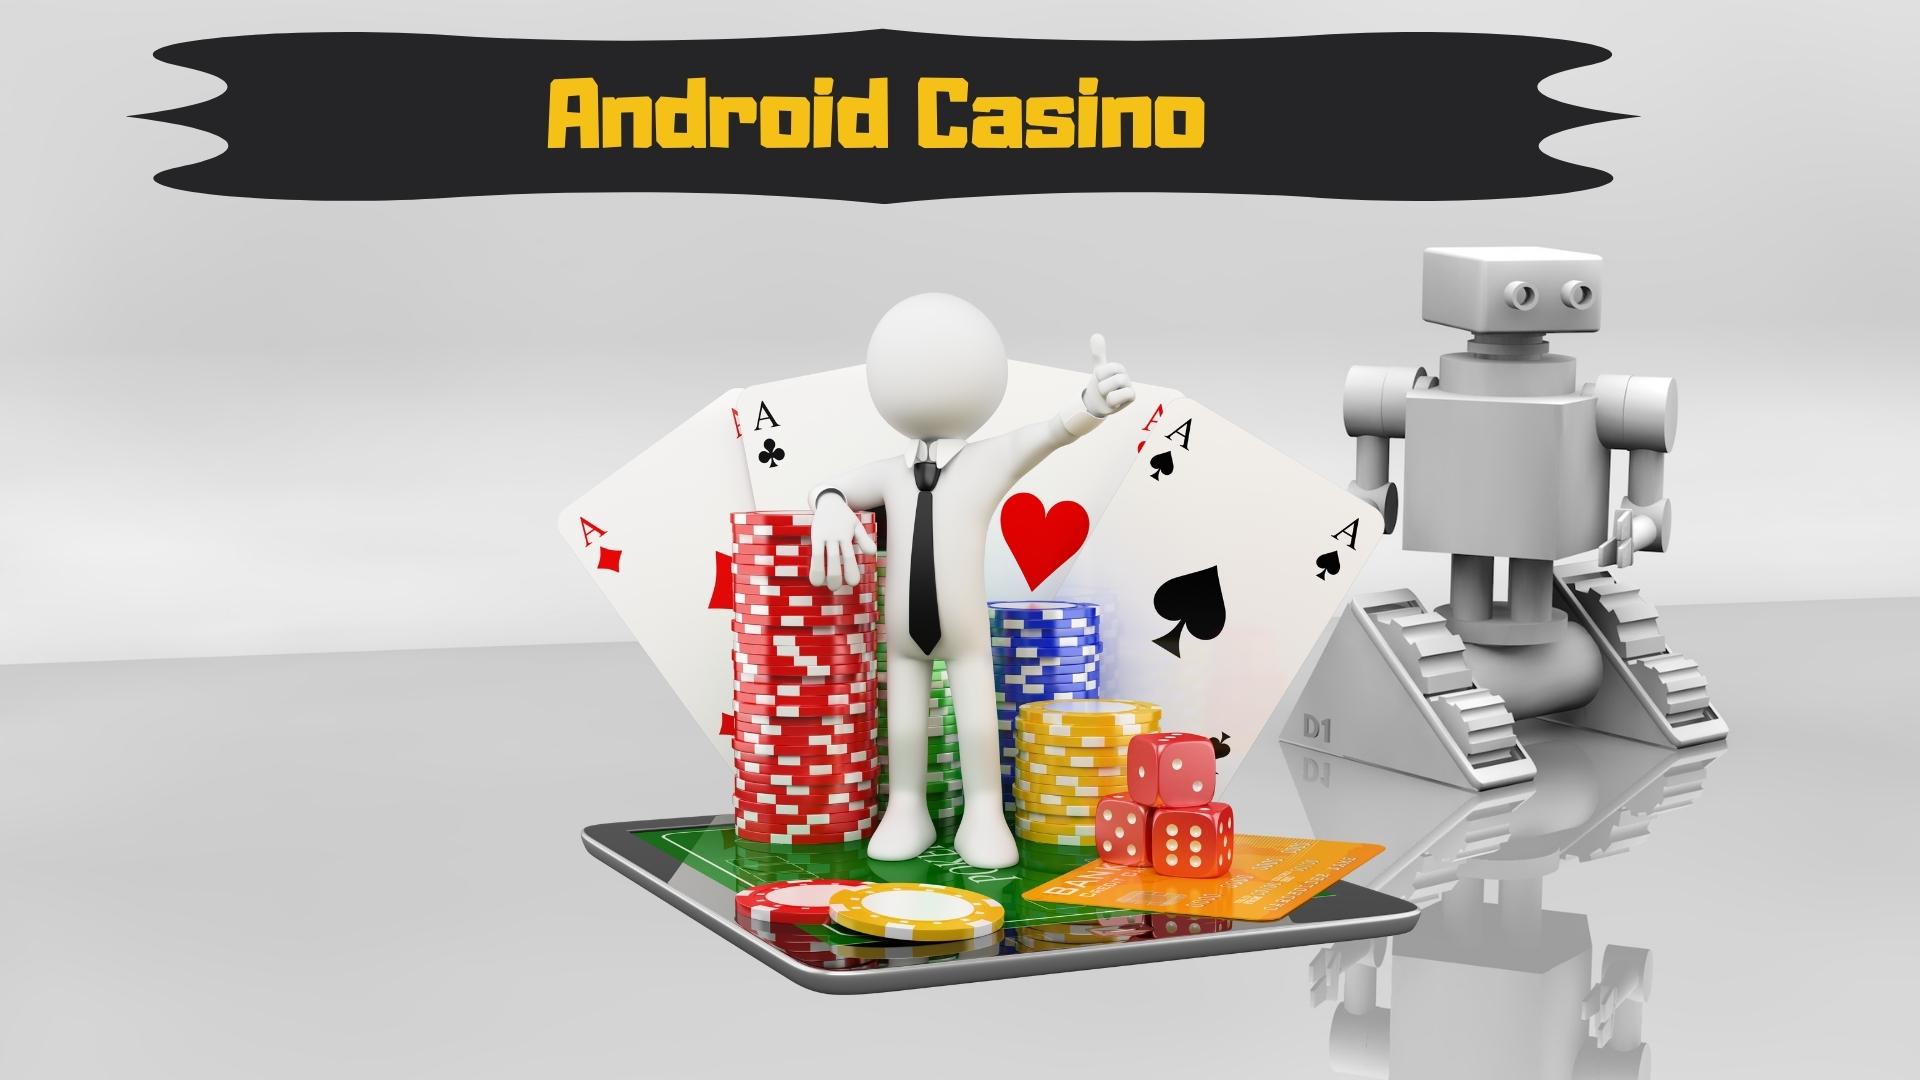 Android Casino – Play Casino Games With Android